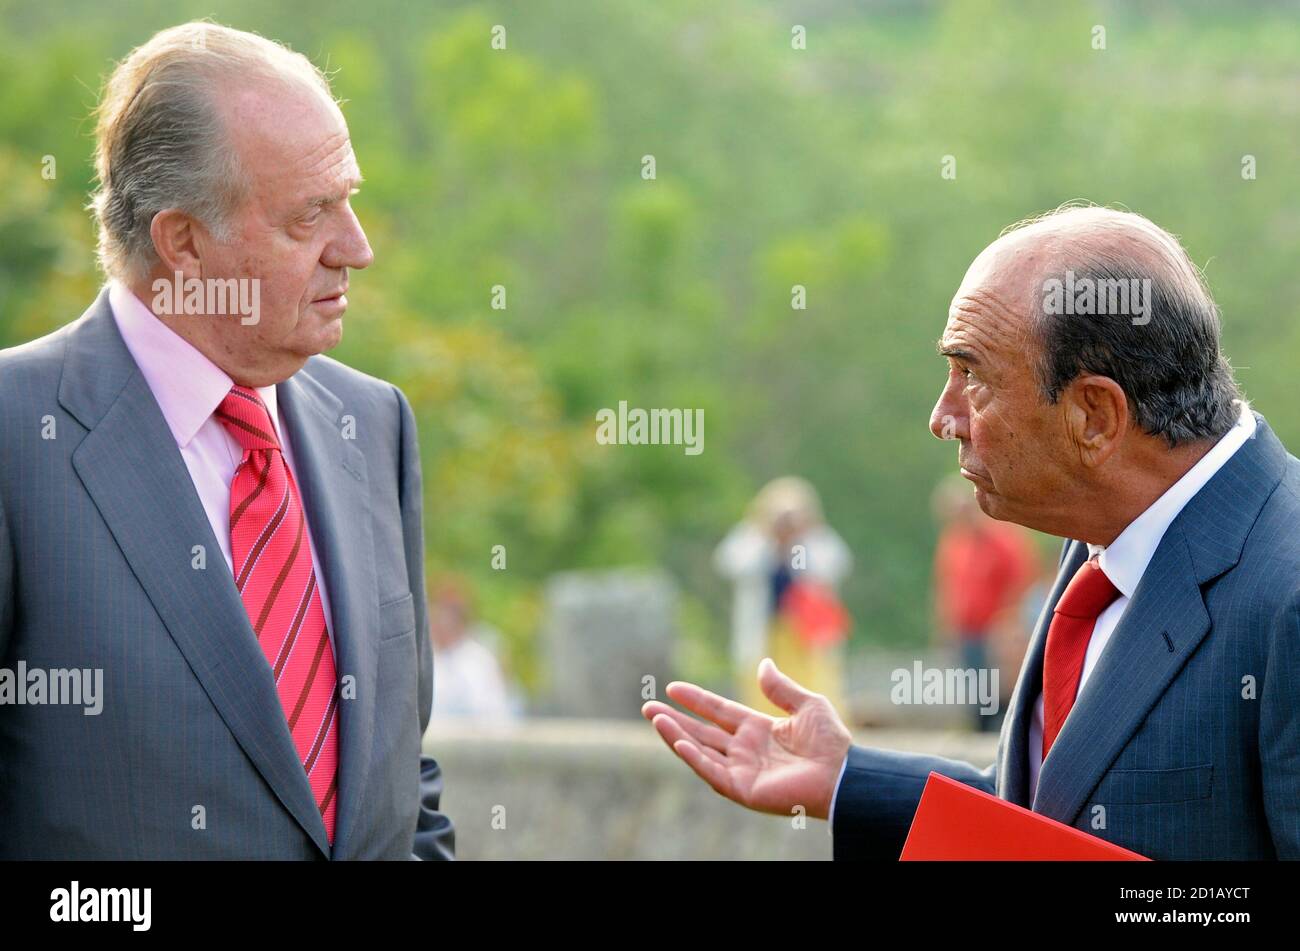 Spain's King Juan Carlos (L) listens to Emilio Botin, chairman of Spain's  biggest bank Banco Santander, after a reunion at the Comillas foundation in  northern Spain July 1, 2008. REUTERS/Nacho Cubero (SPAIN